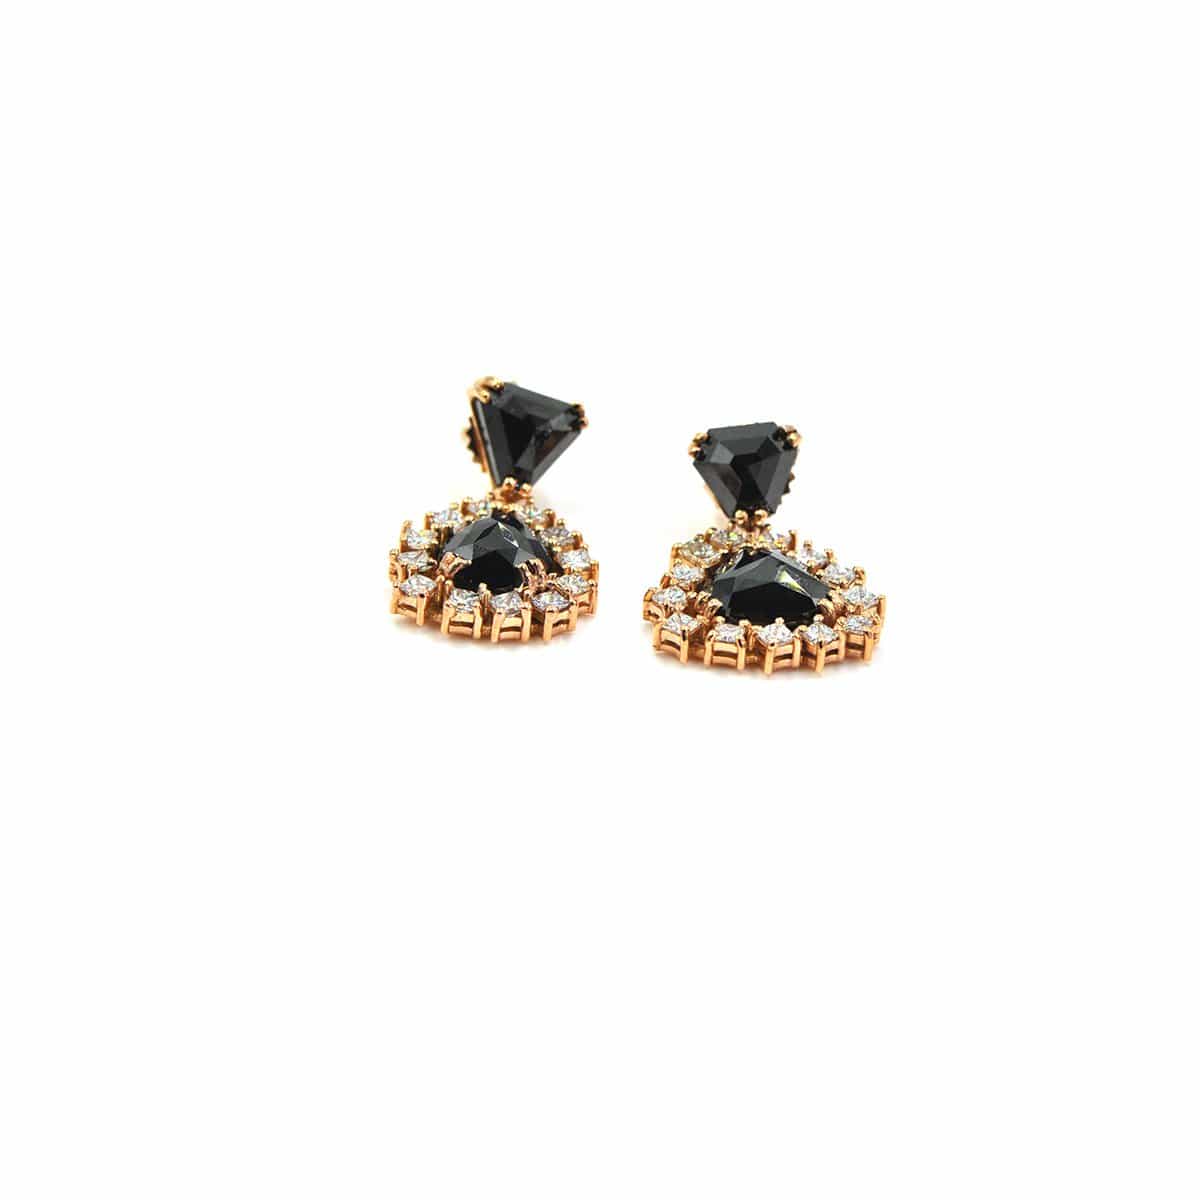 New-  18 KARAT GOLD AND BLACK AND WHITE DIAMOND EARRINGS - RED GOLD